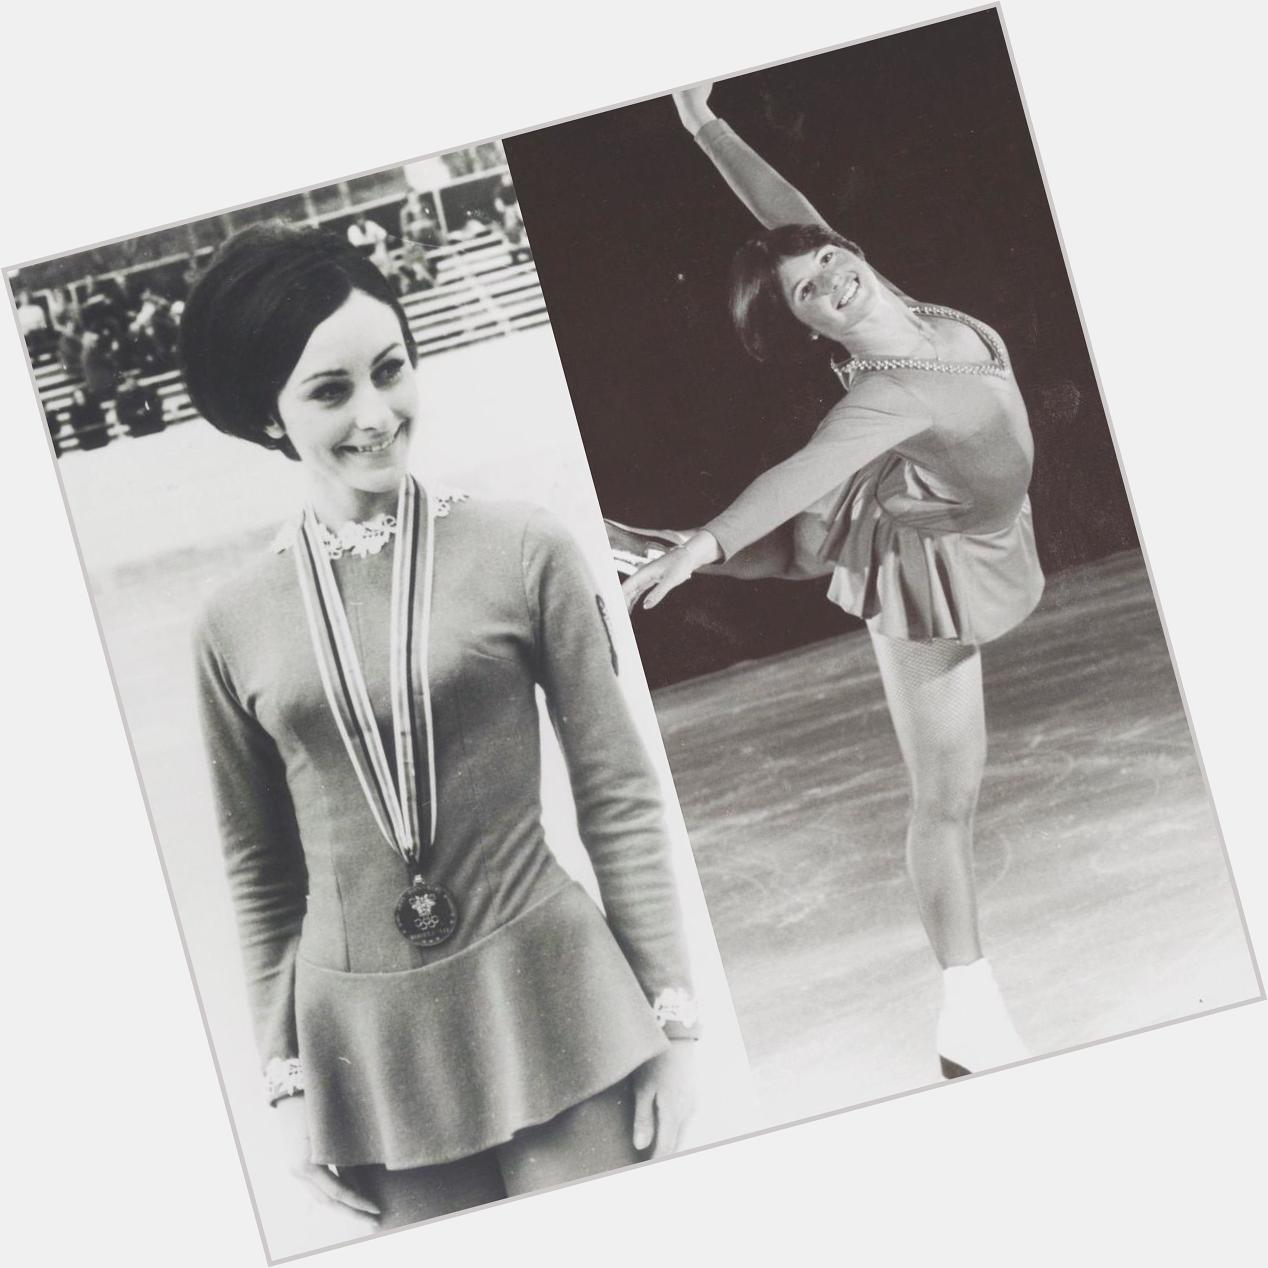 A pair of GOLDEN birthdays over the last couple of days...Happy Birthday to Dorothy Hamill and Peggy Fleming! 